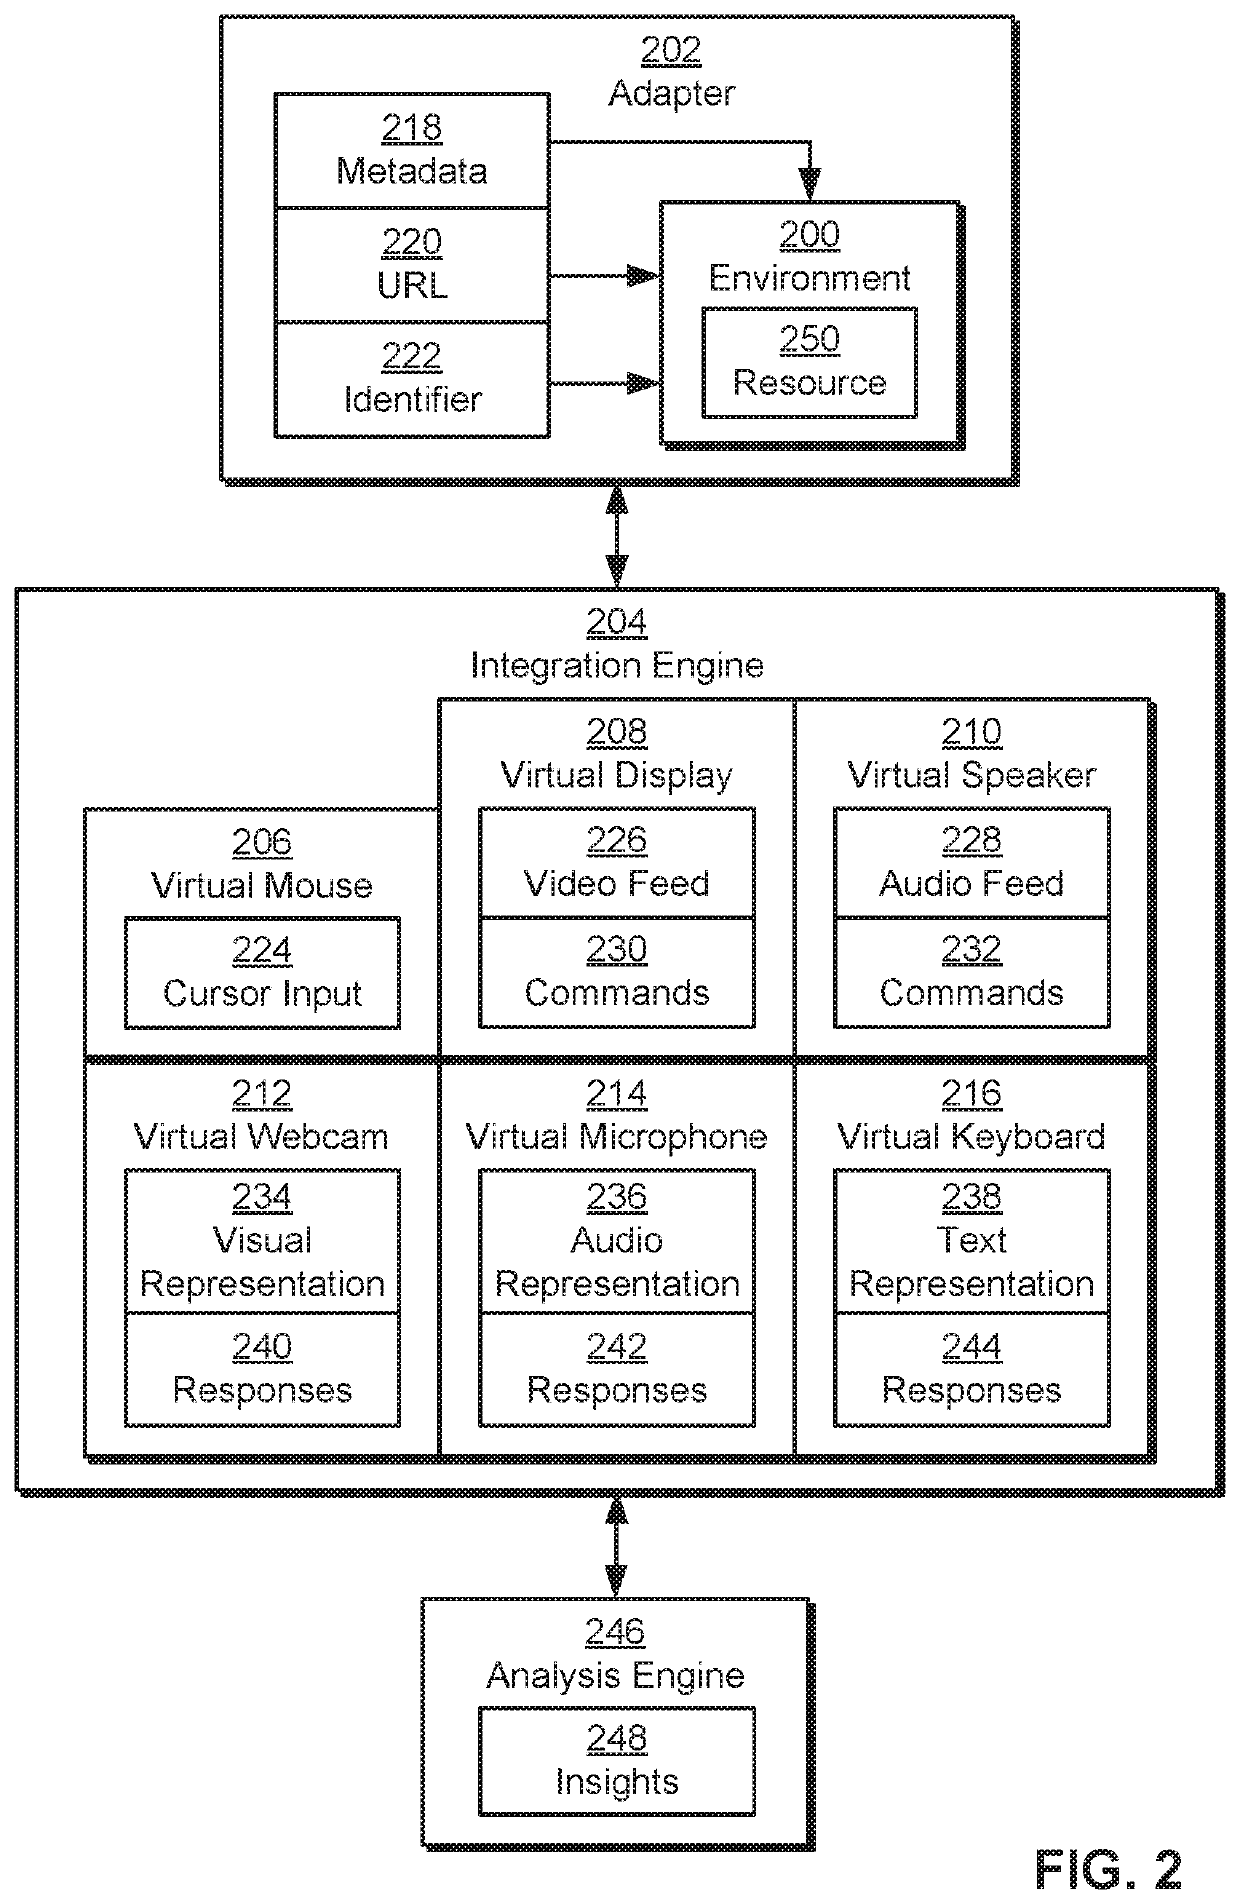 Enhancing meeting participation by an interactive virtual assistant